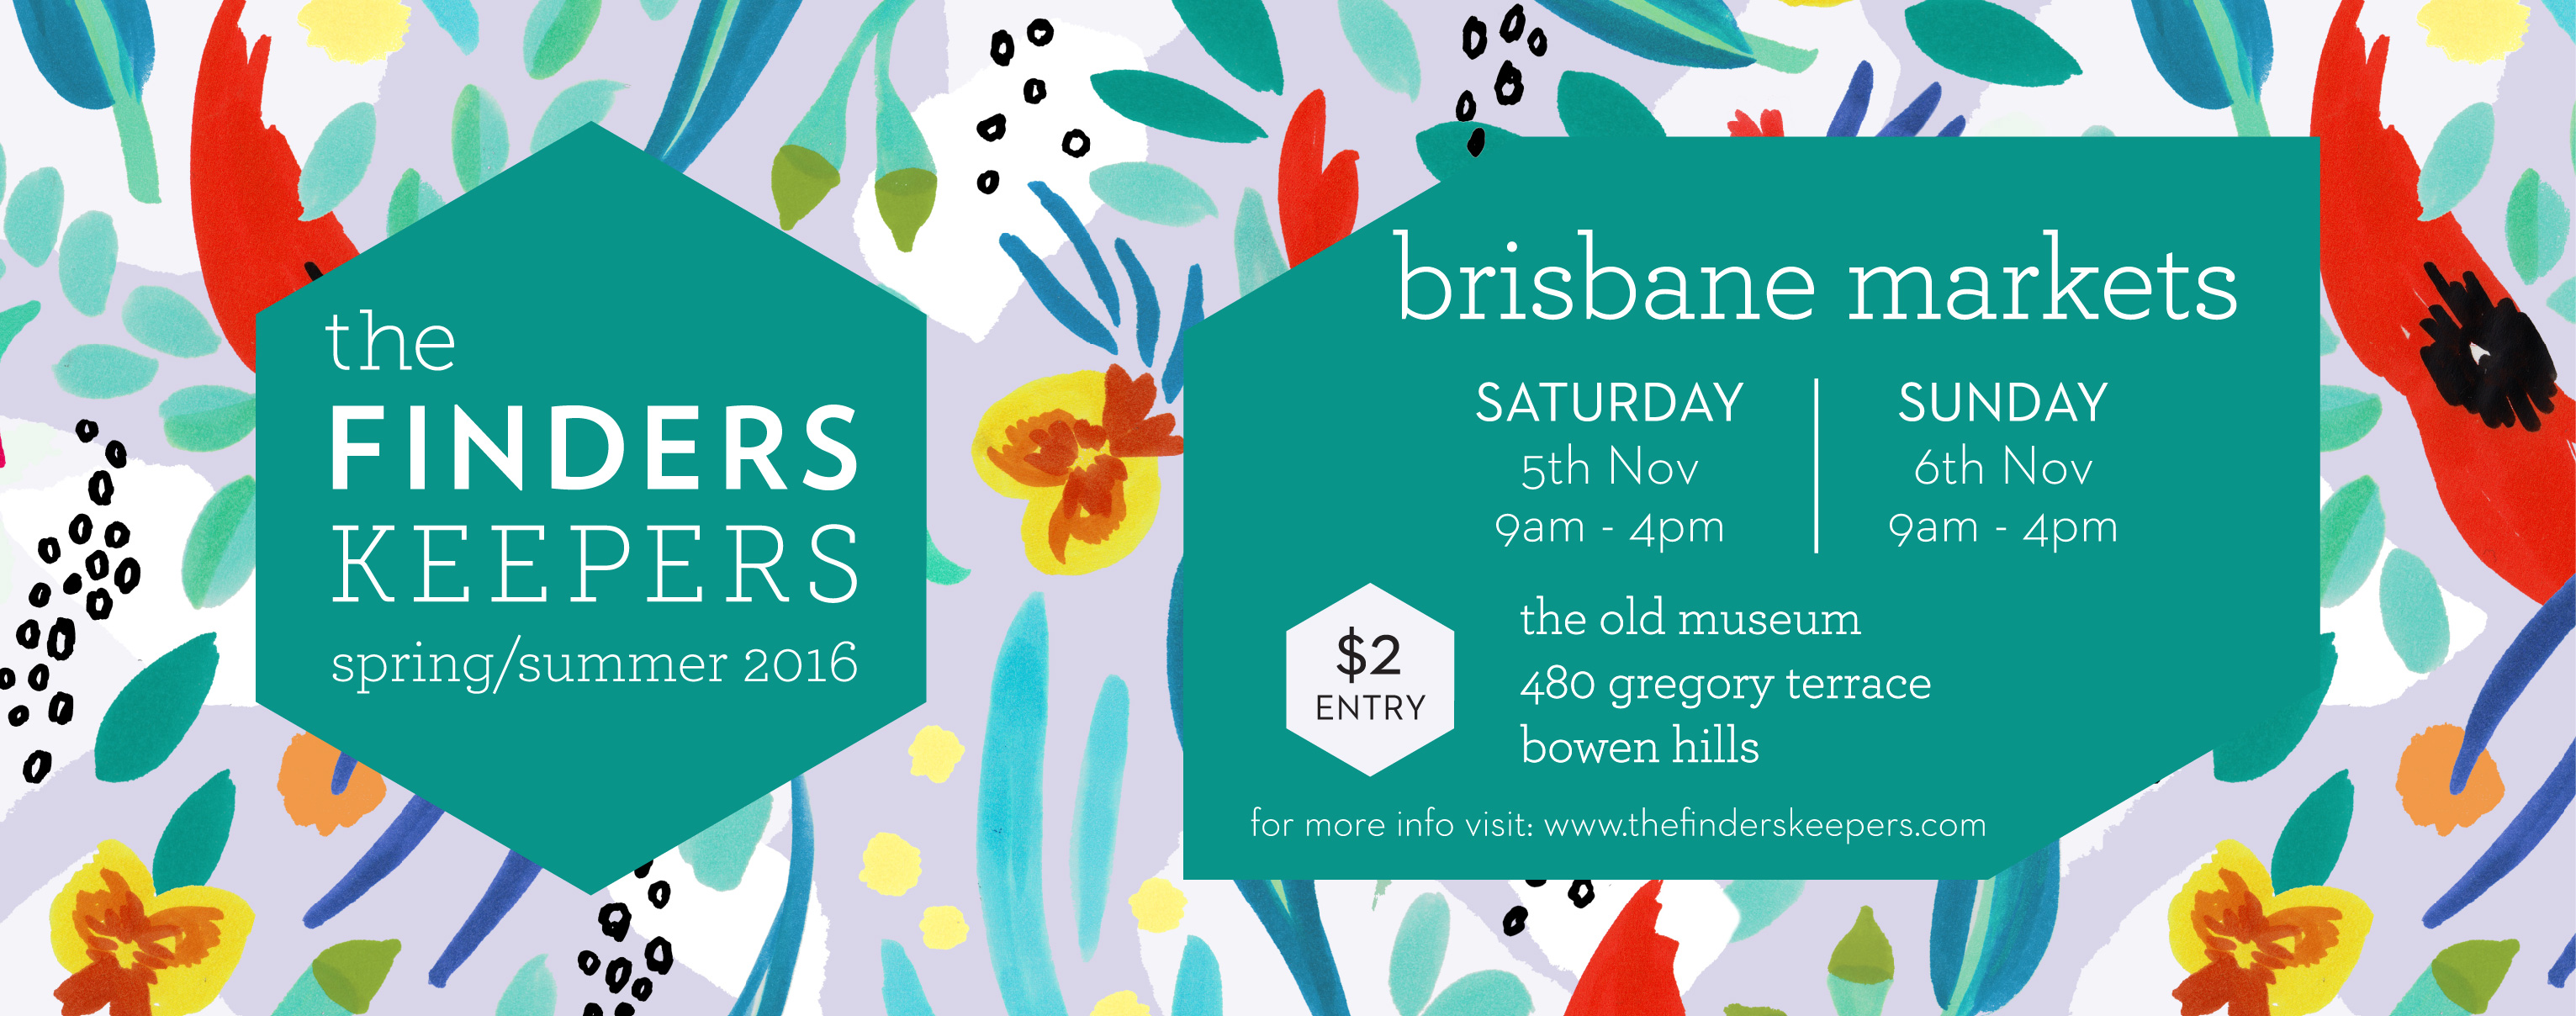 Come and squish my chunky blankets at The Finders Keepers in Brisbane | Homelea Lass